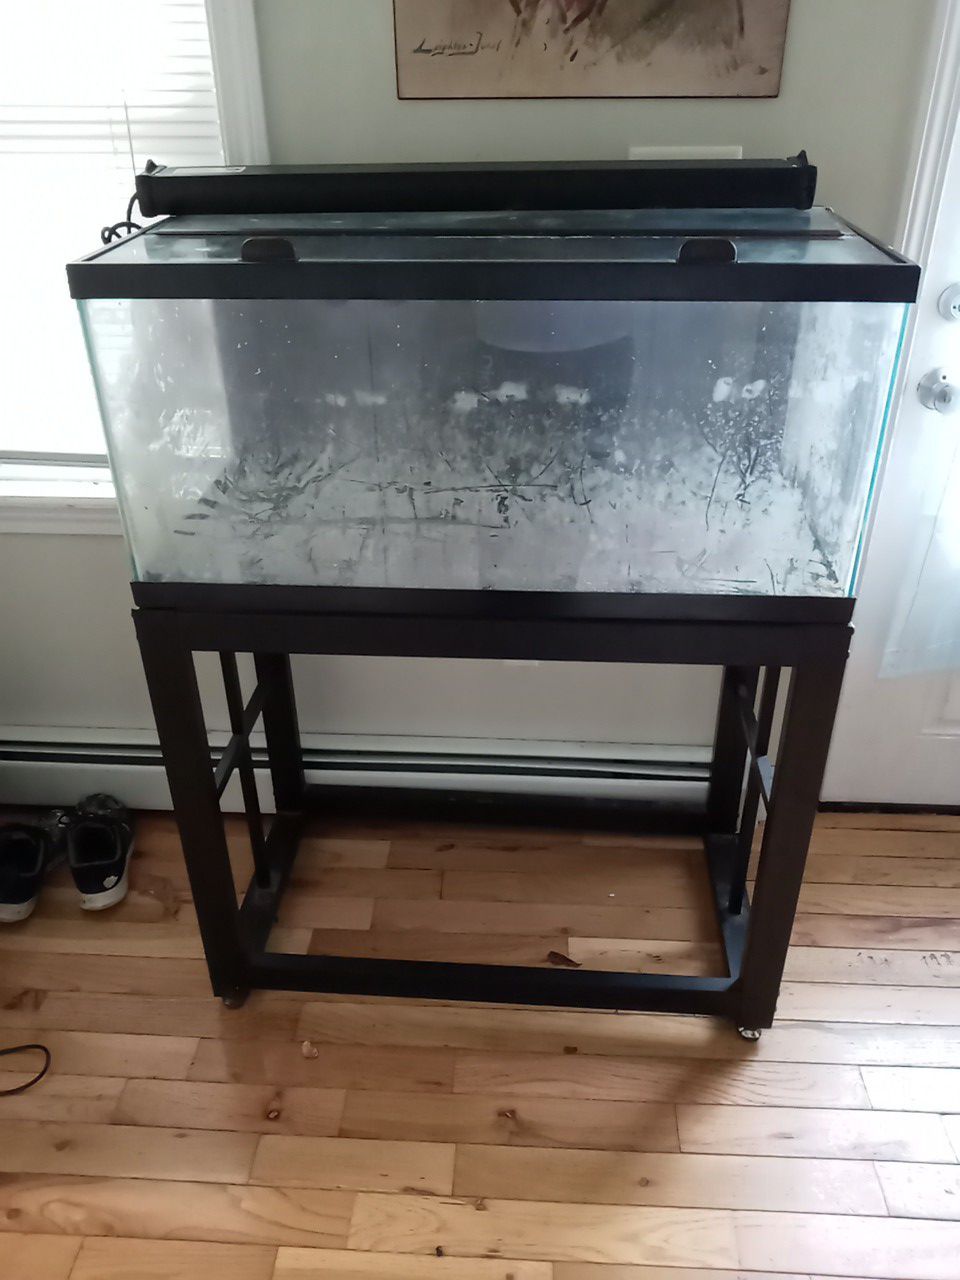 40 gallon fish tank with metal stand